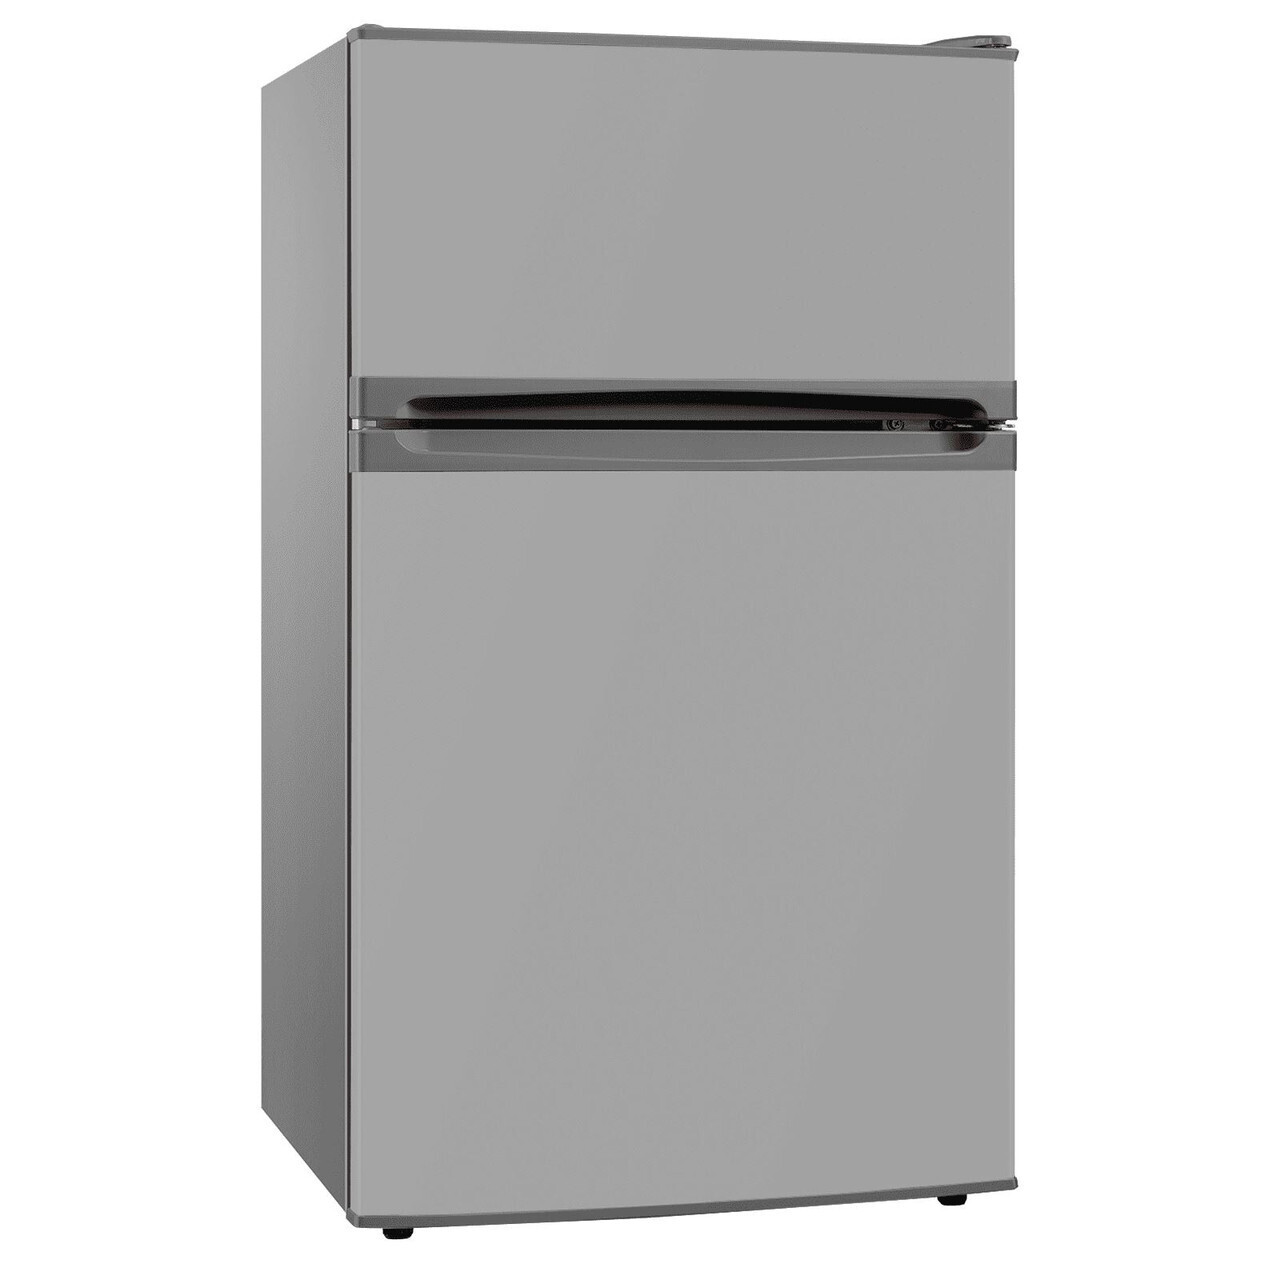 SIA UFF01SS Silver/Grey Freestanding Under Counter Fridge Freezer W479 x D495 x H845 New, Located in Whitby Road Shop